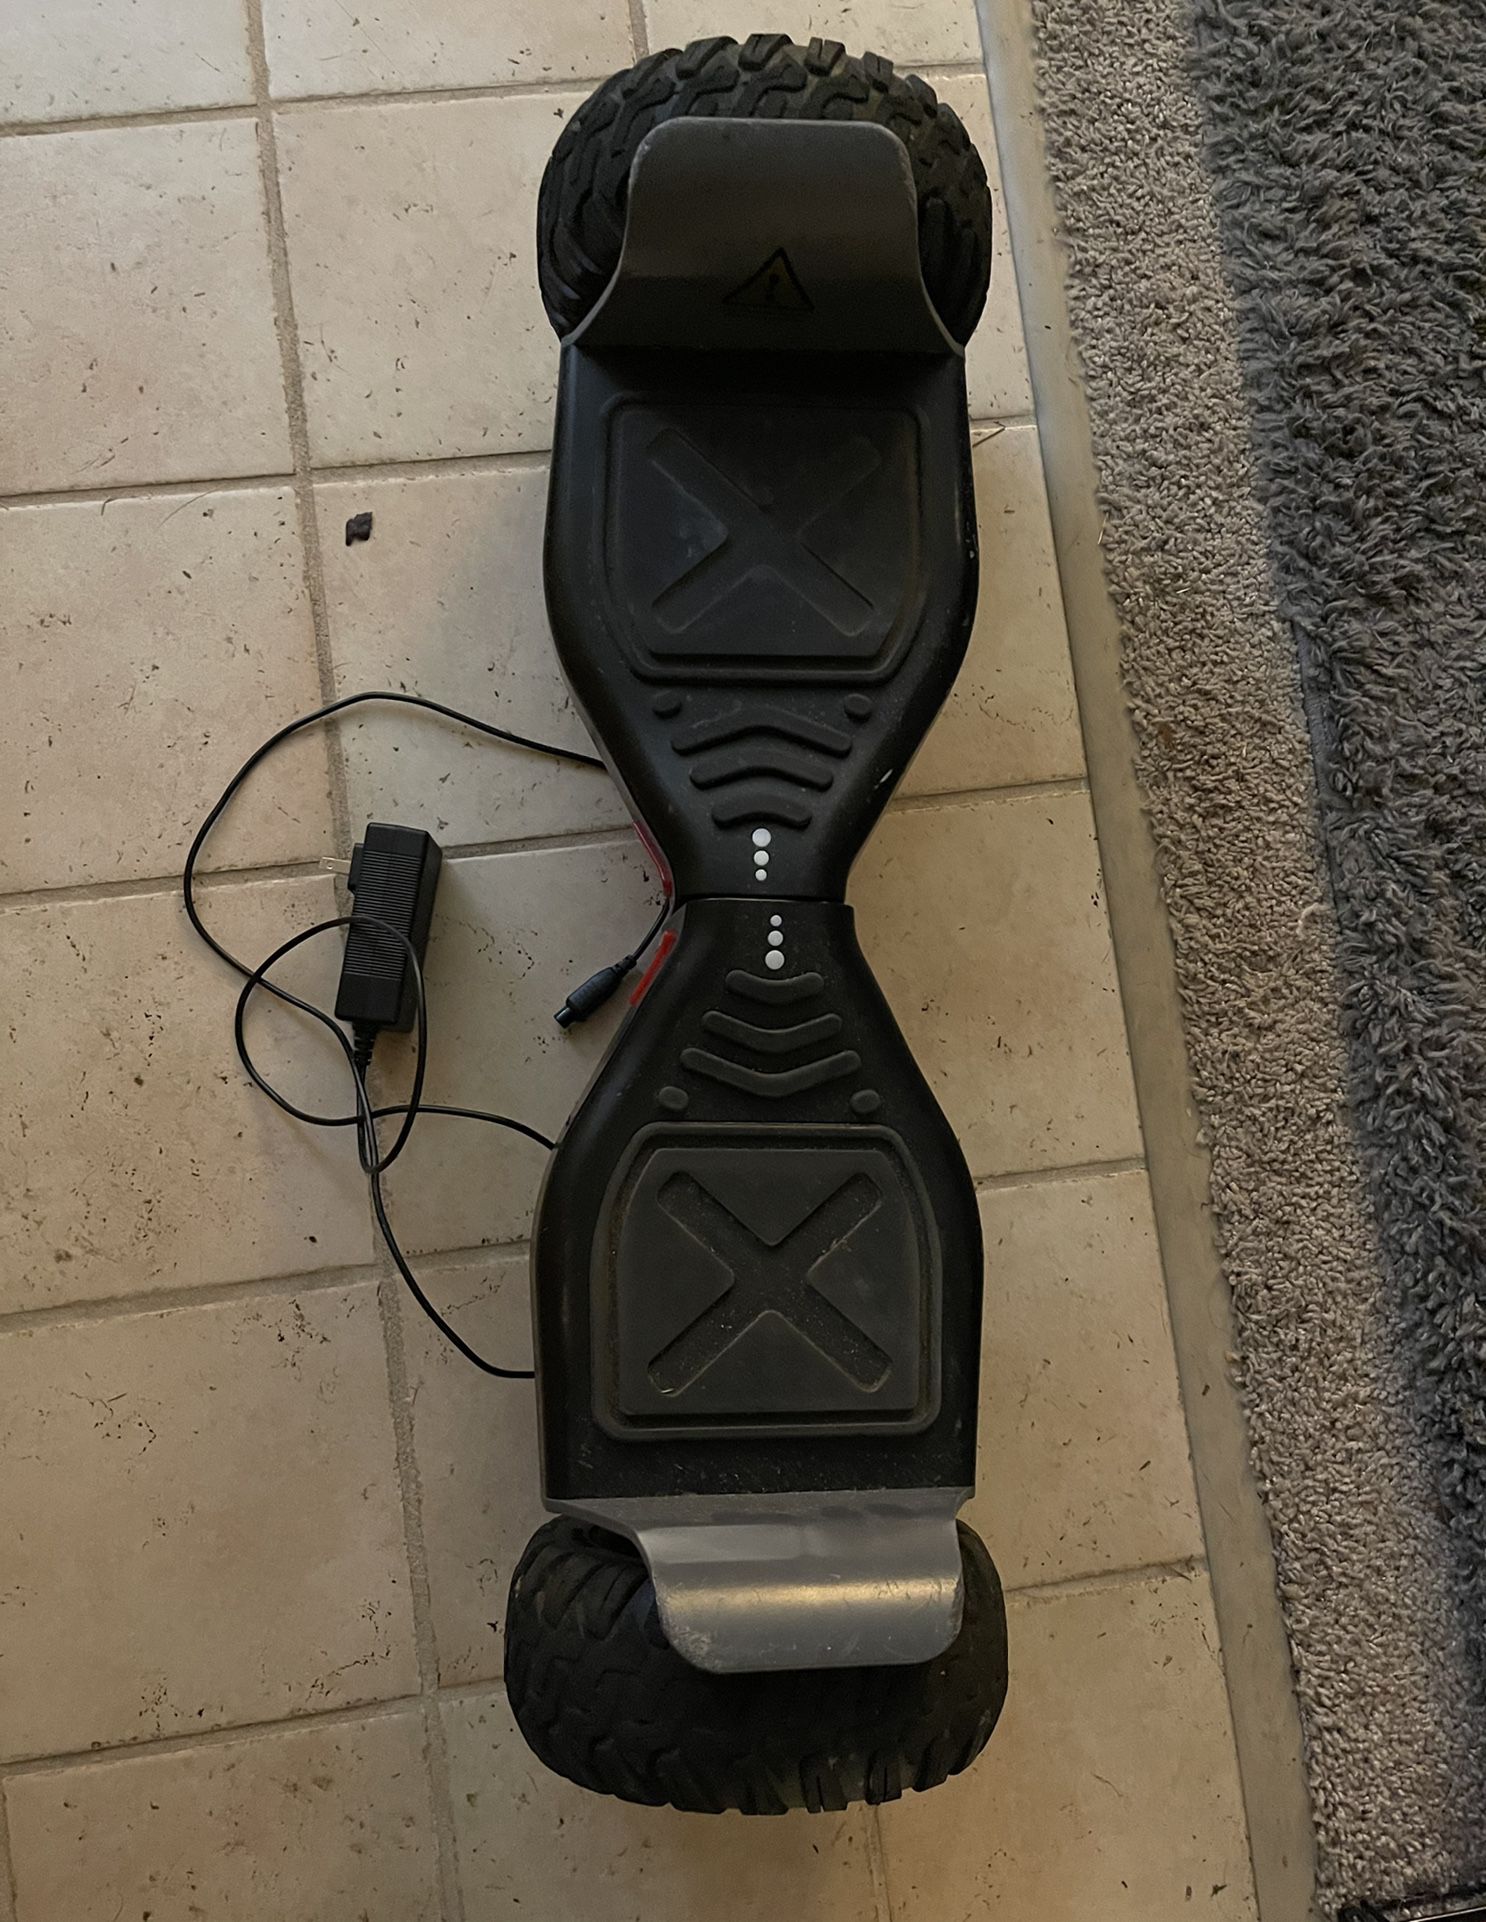 Electric hoverboard